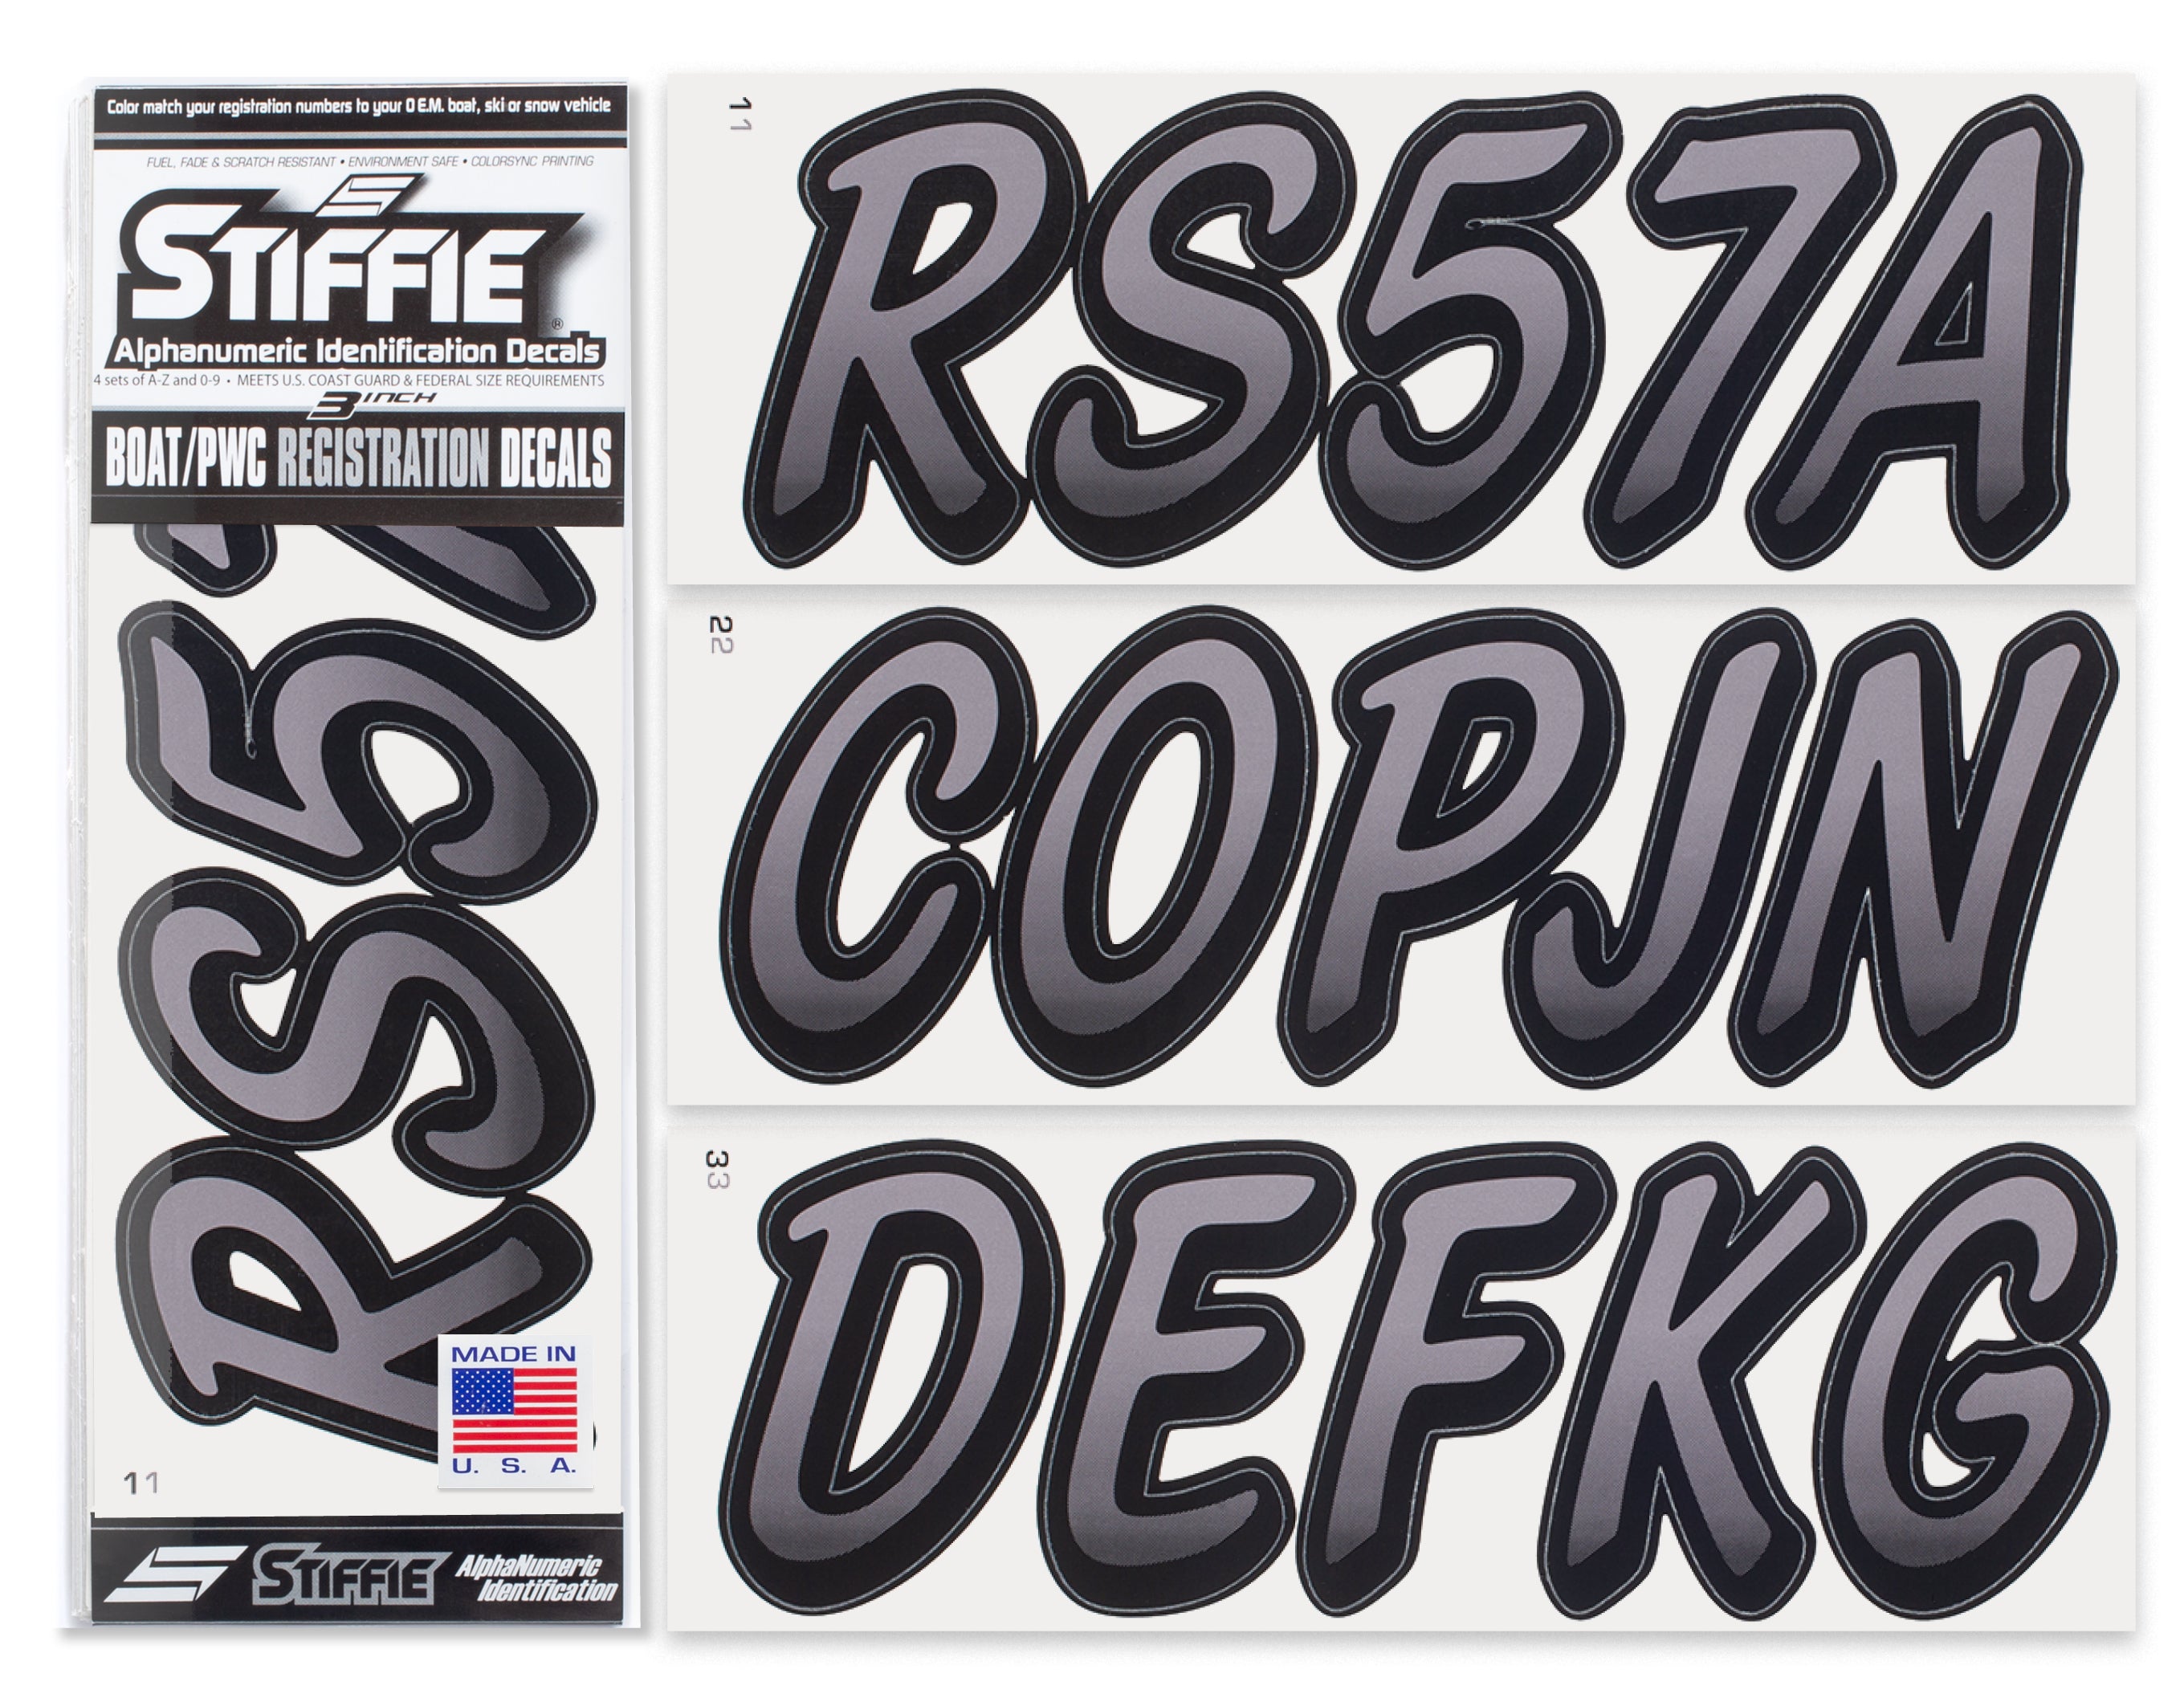 STIFFIE Whipline Gunmetal/Black 3" Alpha-Numeric Registration Identification Numbers Stickers Decals for Boats & Personal Watercraft